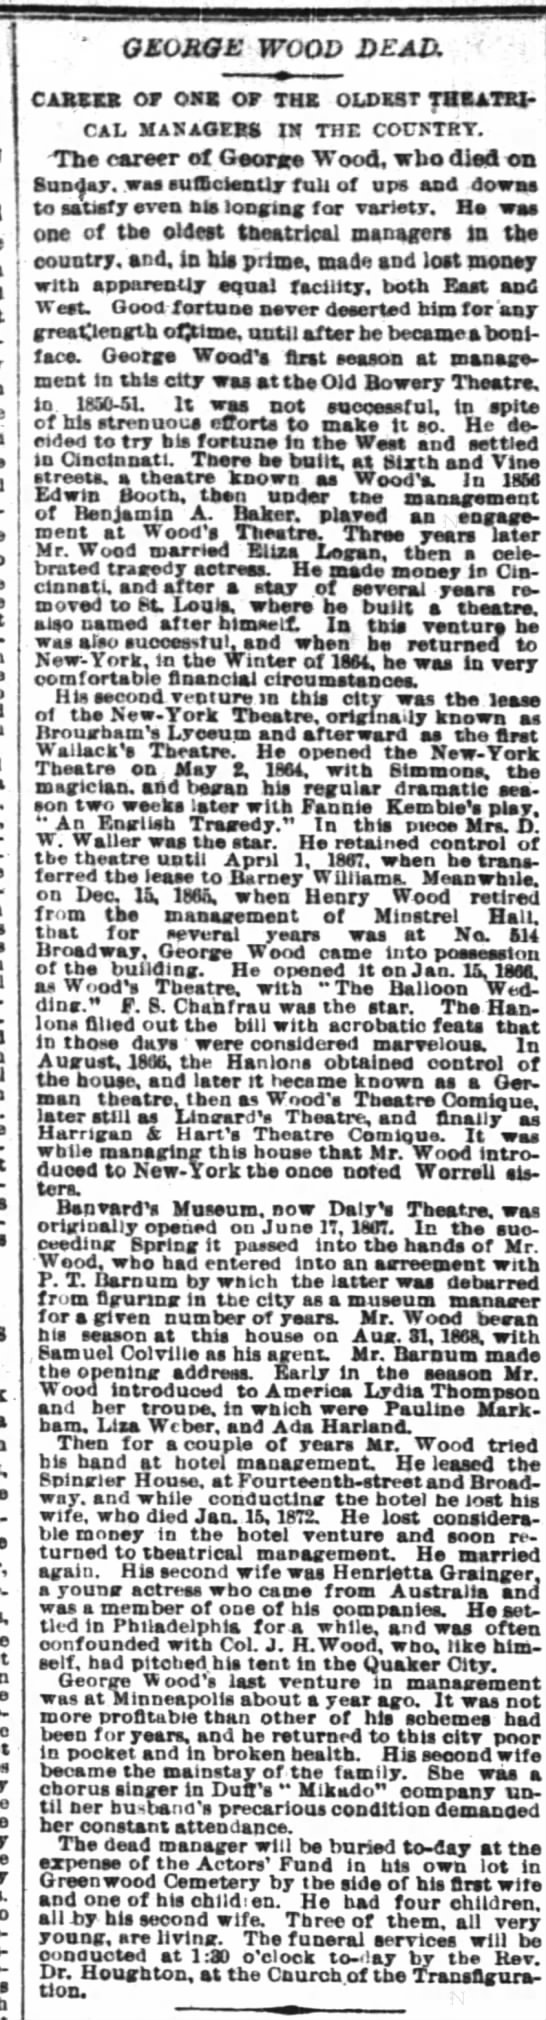 George Wood Theatrical
18 May 1886 NY Times - 